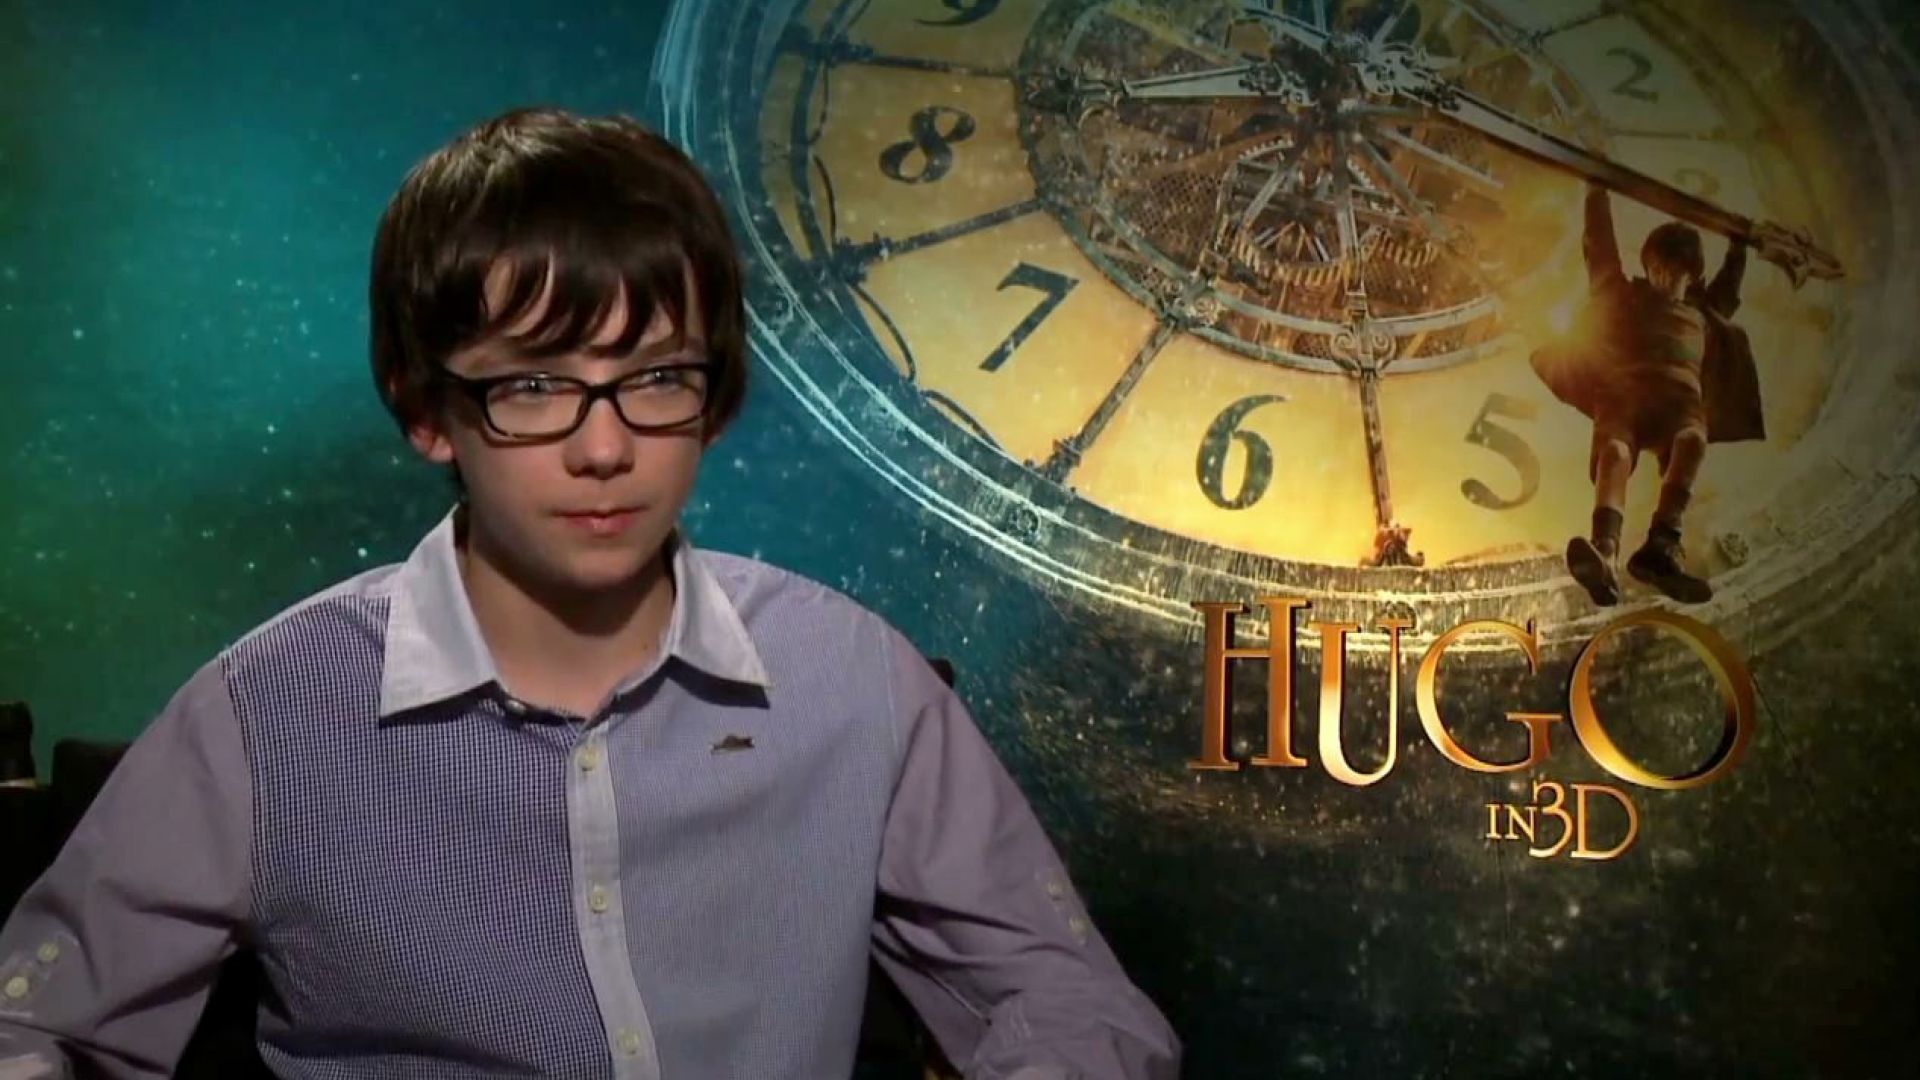 Asa Butterfield on being directed by Martin Scorsese in Hugo